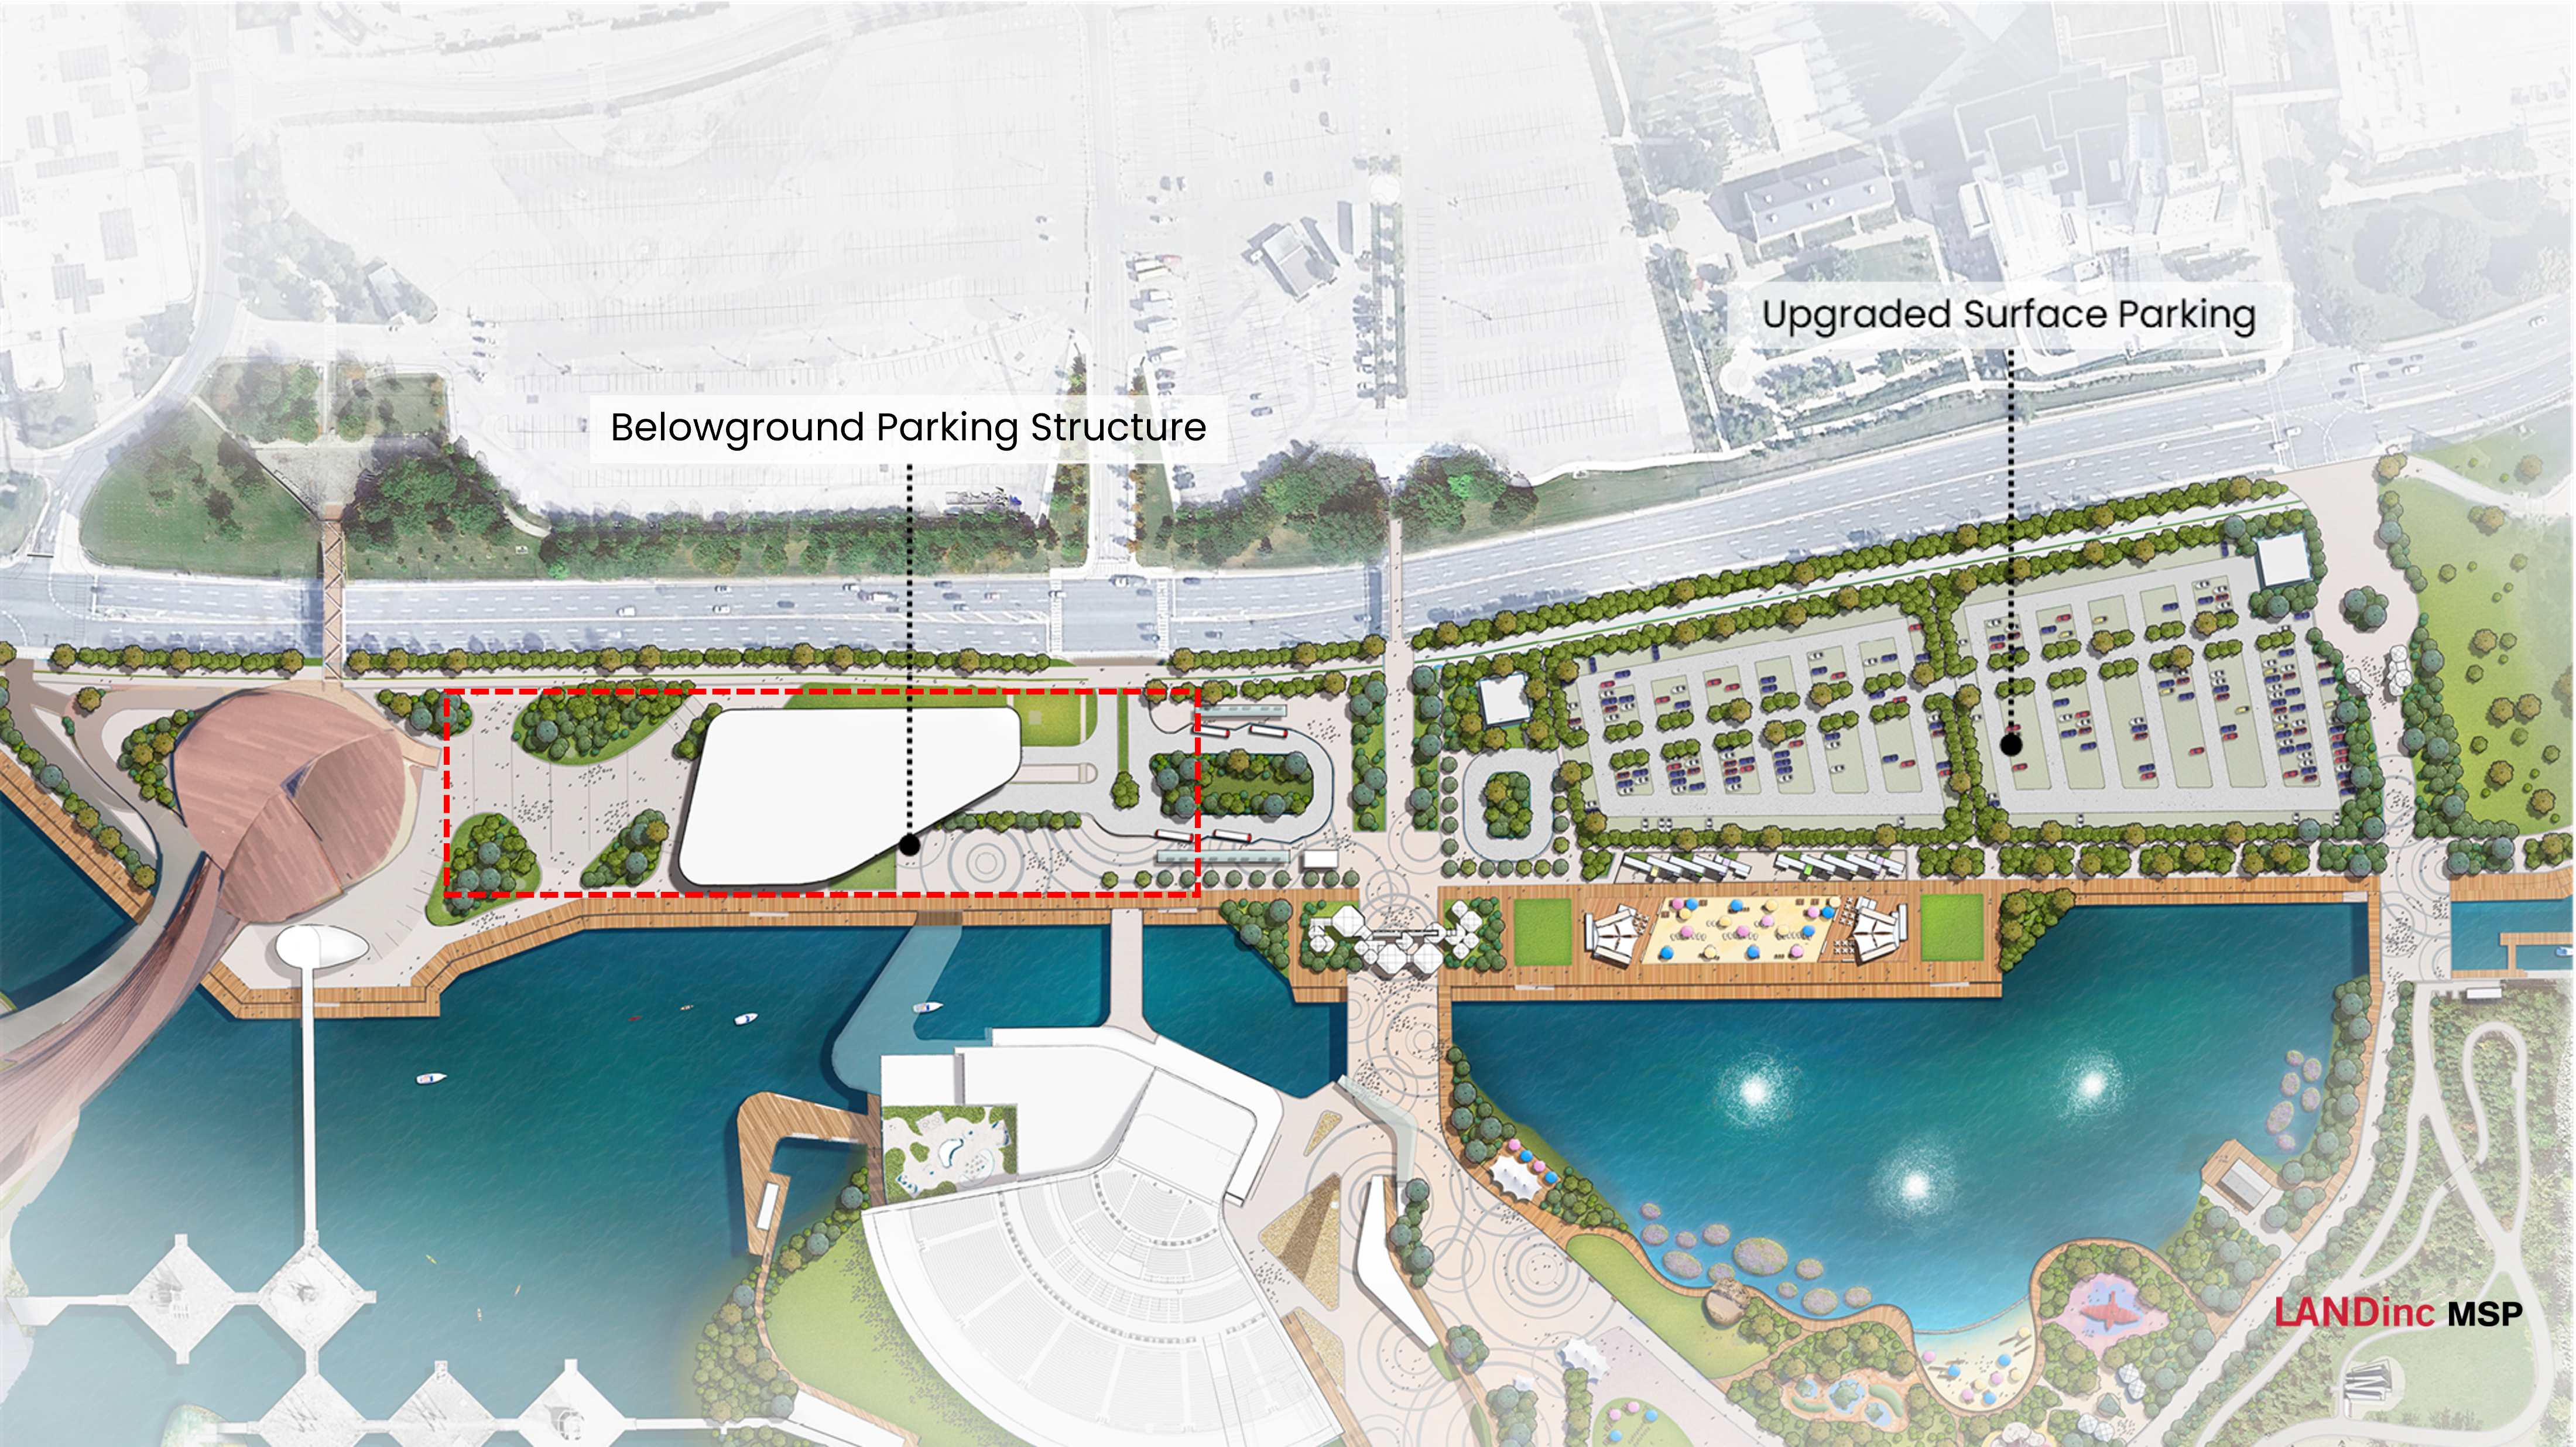 Rendering of the Mainland of Ontario Place showing underground parking to the west and an upgraded surface parking lot to the east